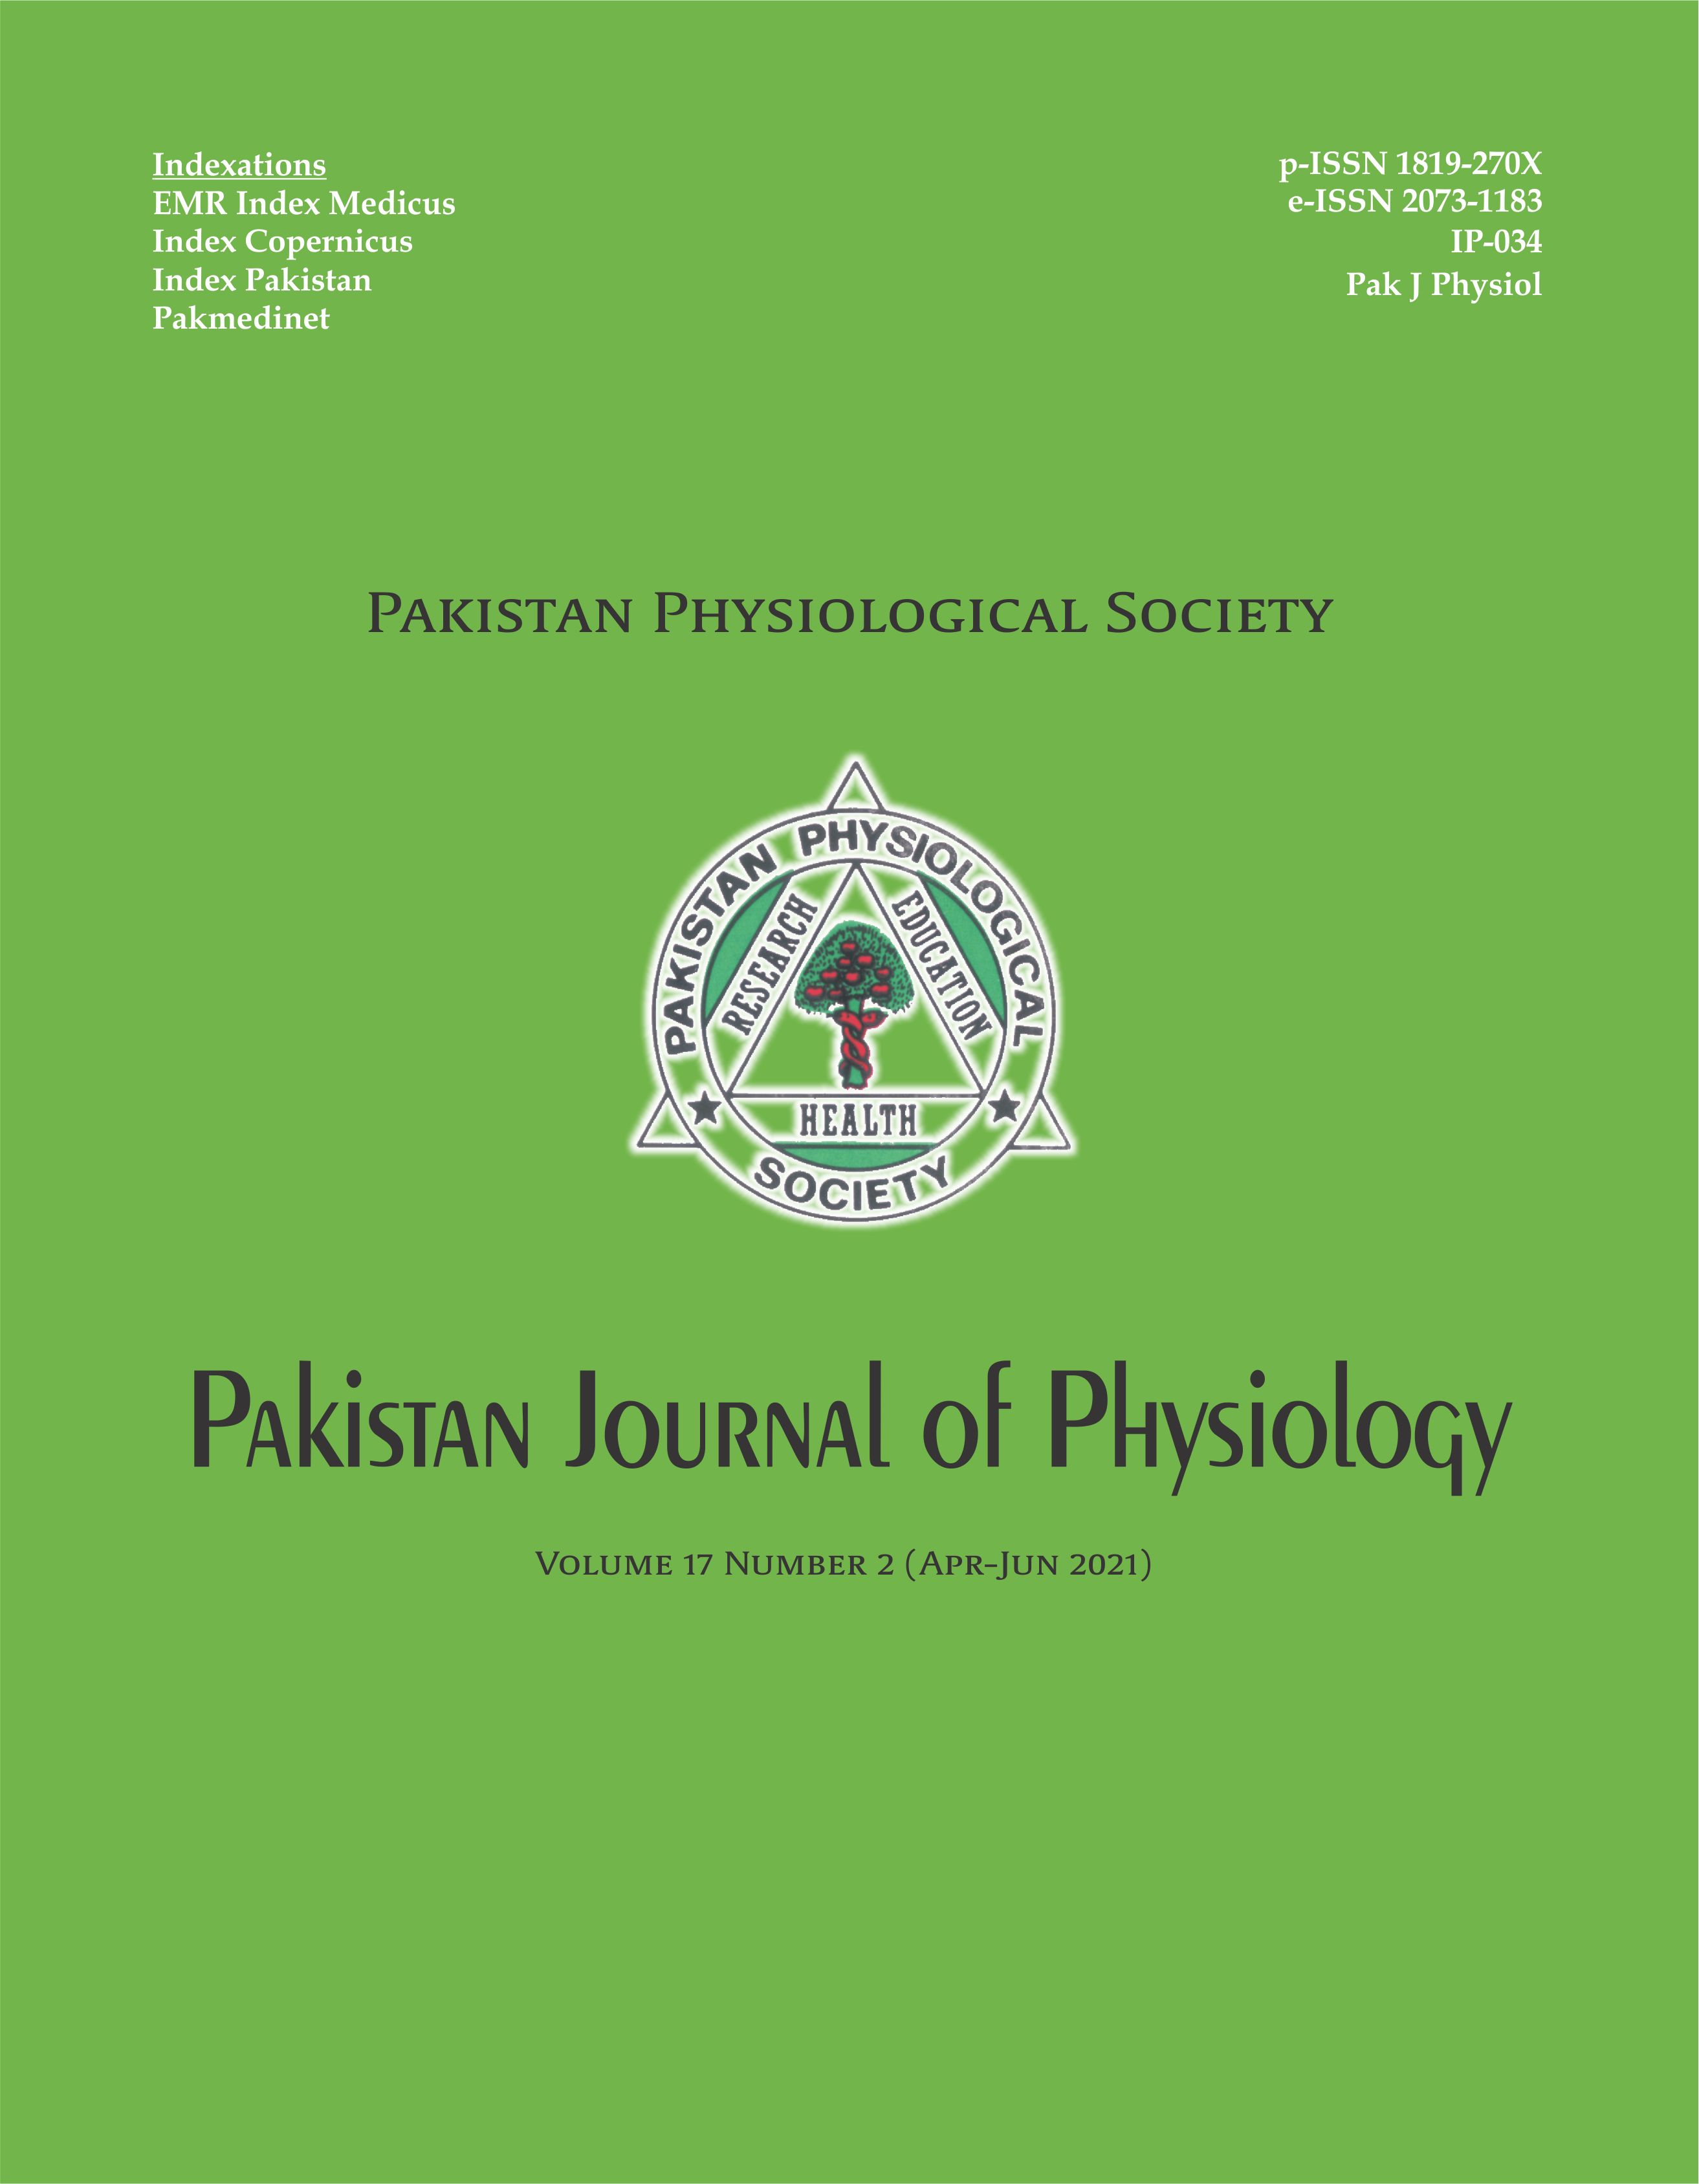 					View Vol. 17 No. 2 (2021): Pakistan Journal of Physiology
				